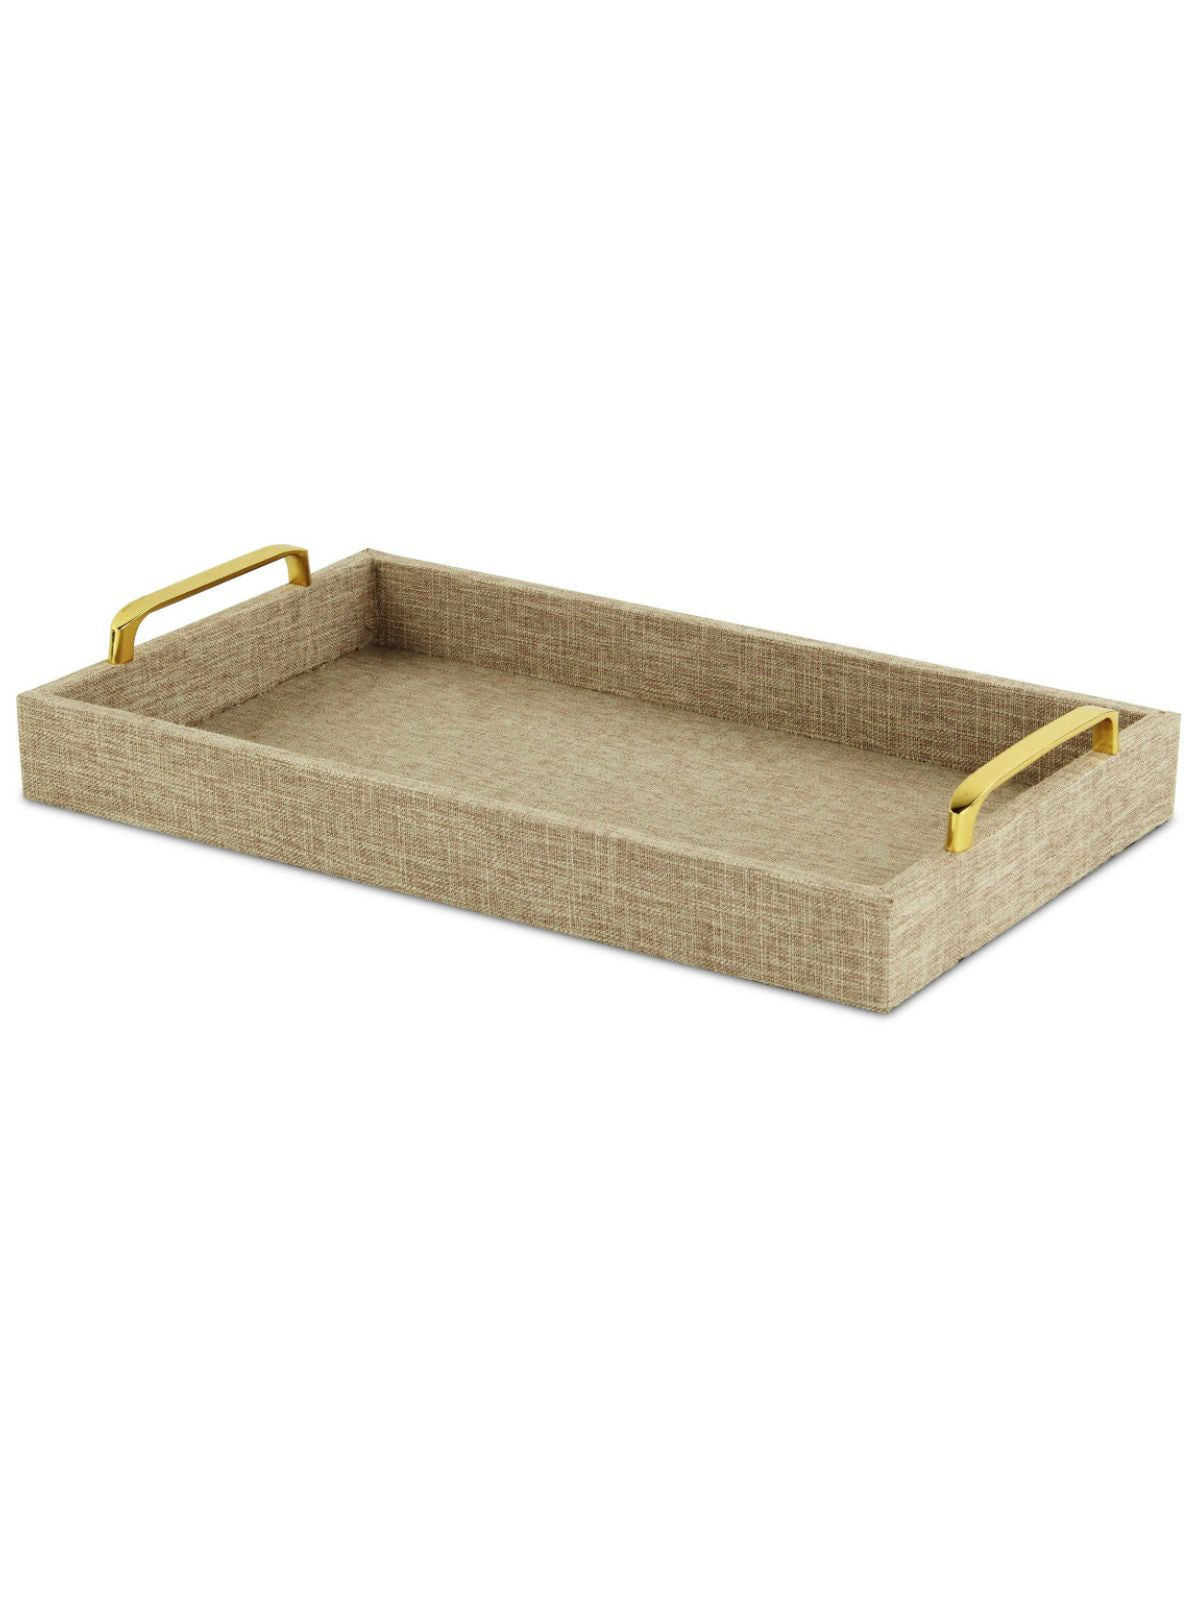 The Isola Di Canter Linen Tray in Beige is an entirely handmade and hand-crafted design that blends an engineered wood frame with a linen outer fabric and metal hardware.